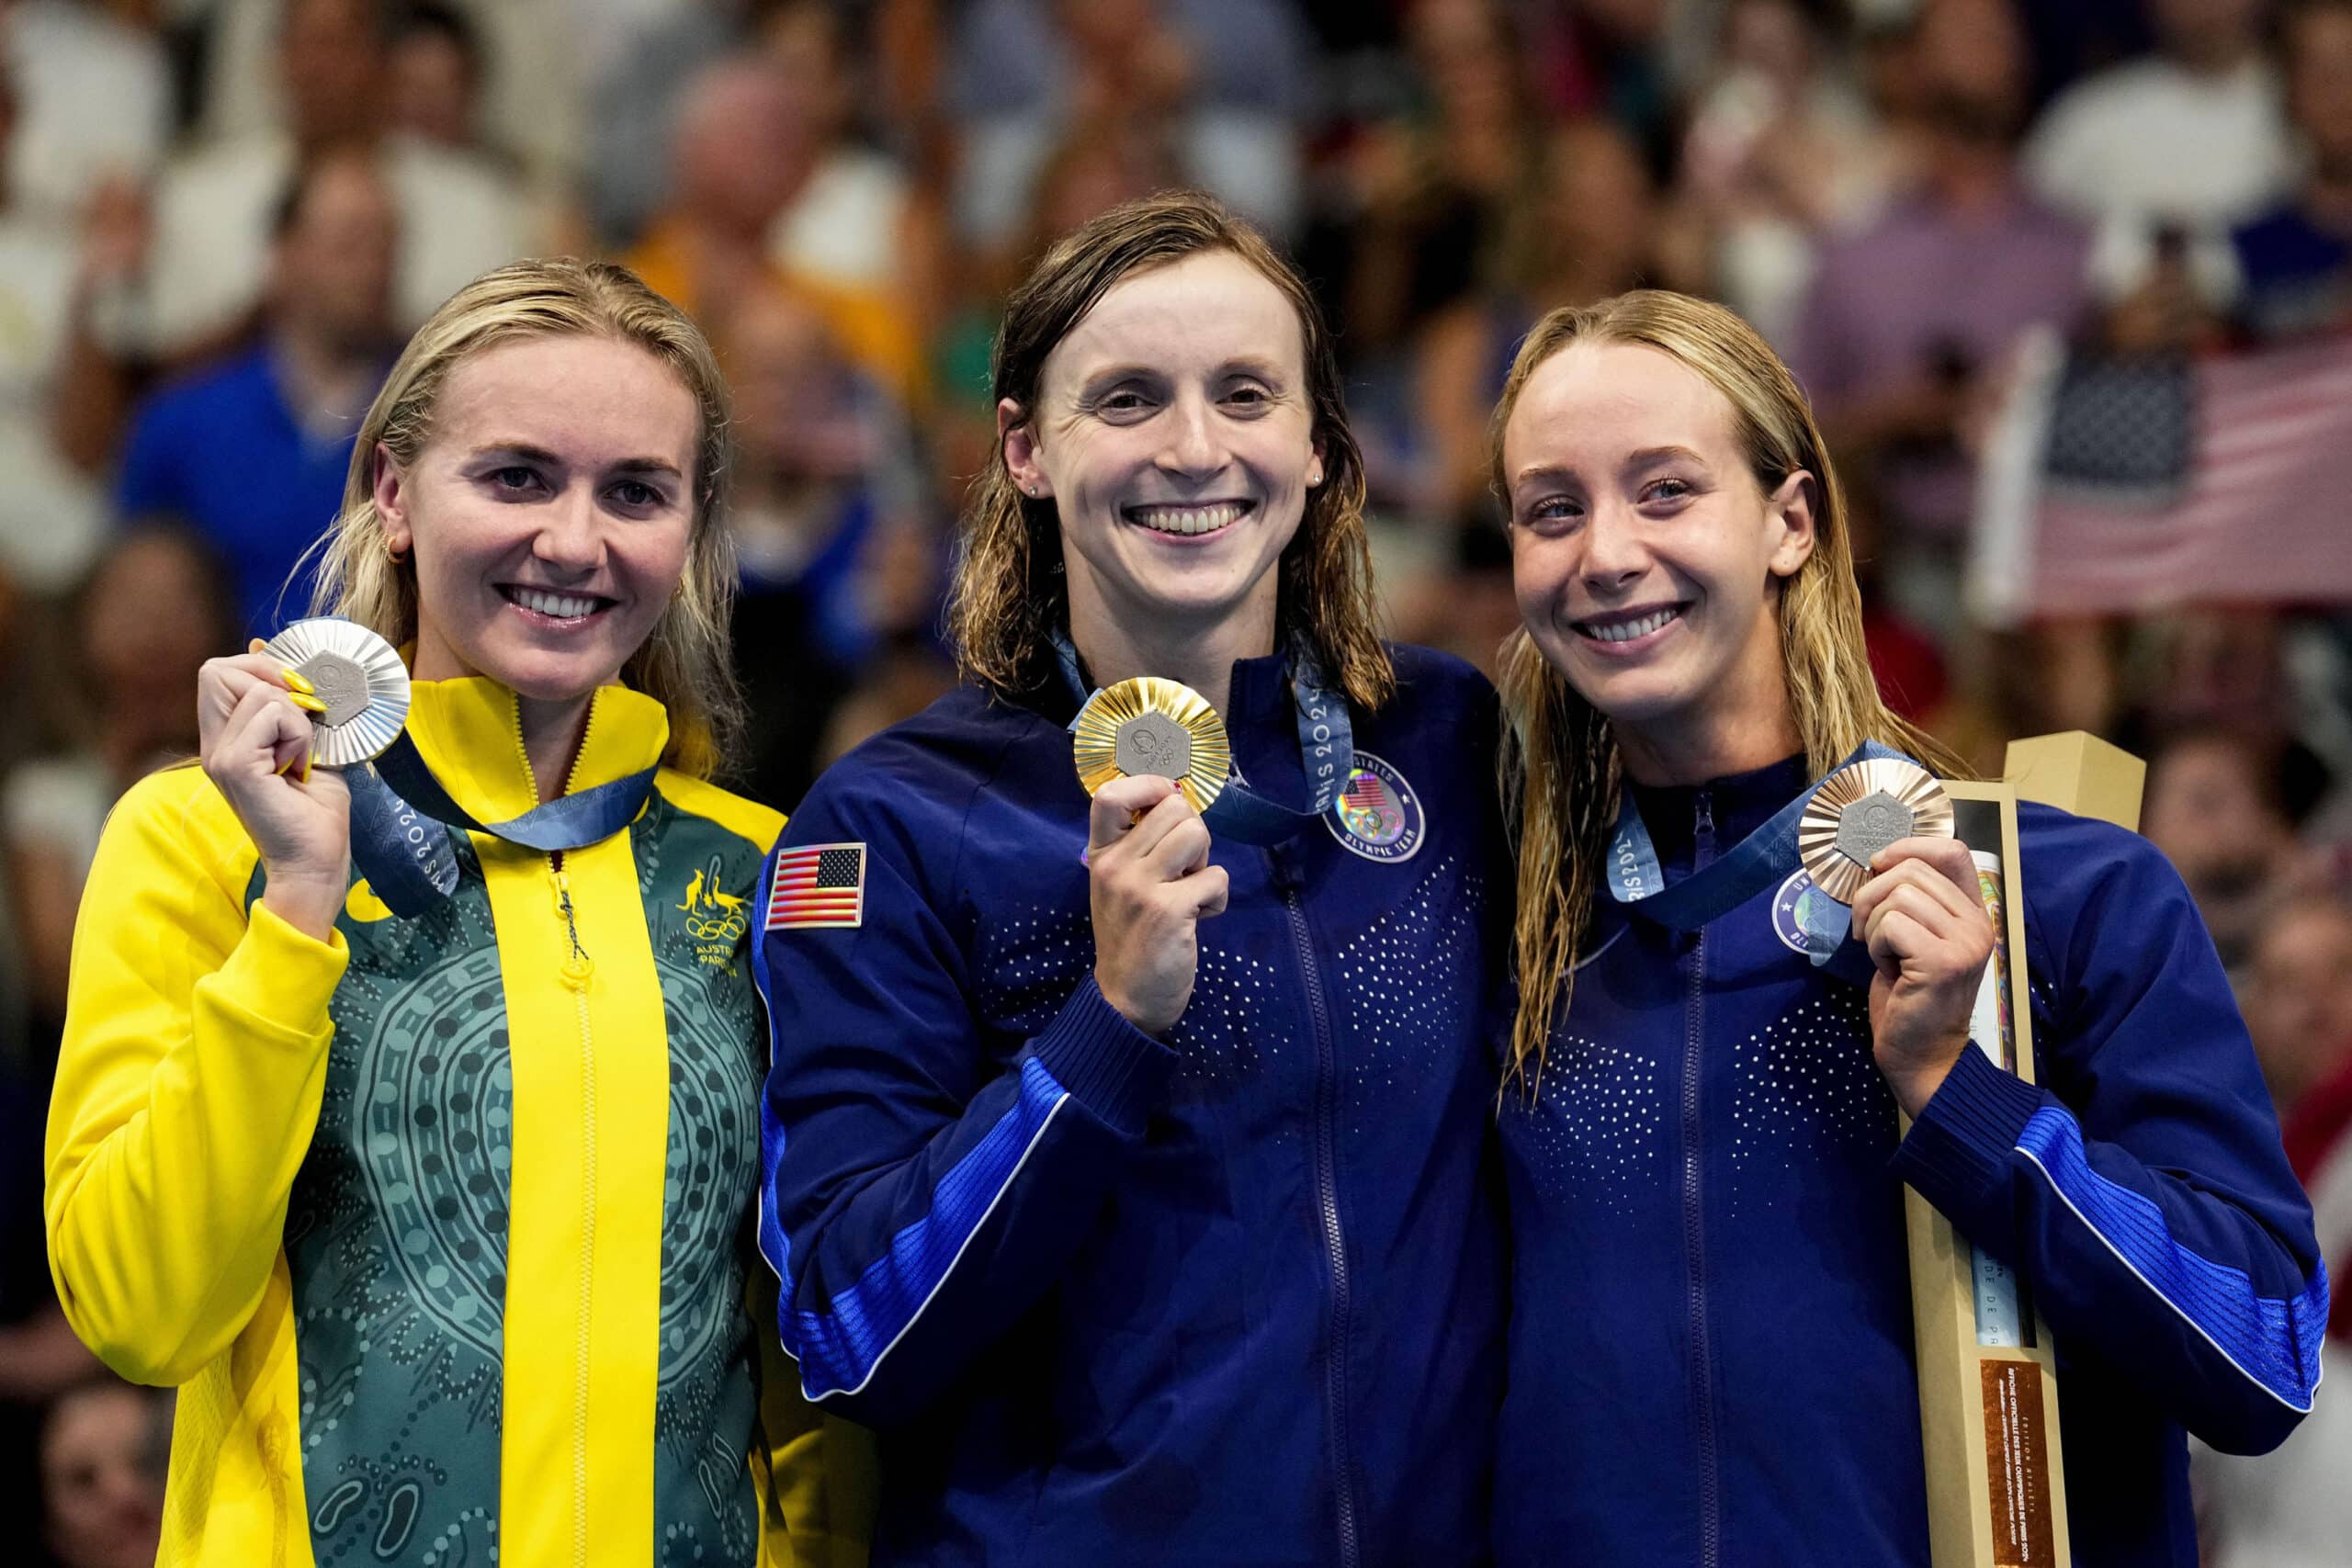 Ariarne Titmus (Australia), Katie Ledecky (USA) and Paige Madden (USA) in the women’s 800-meter freestyle medal ceremony during the Paris 2024 Olympic Summer Games at Paris La Défense Arena.